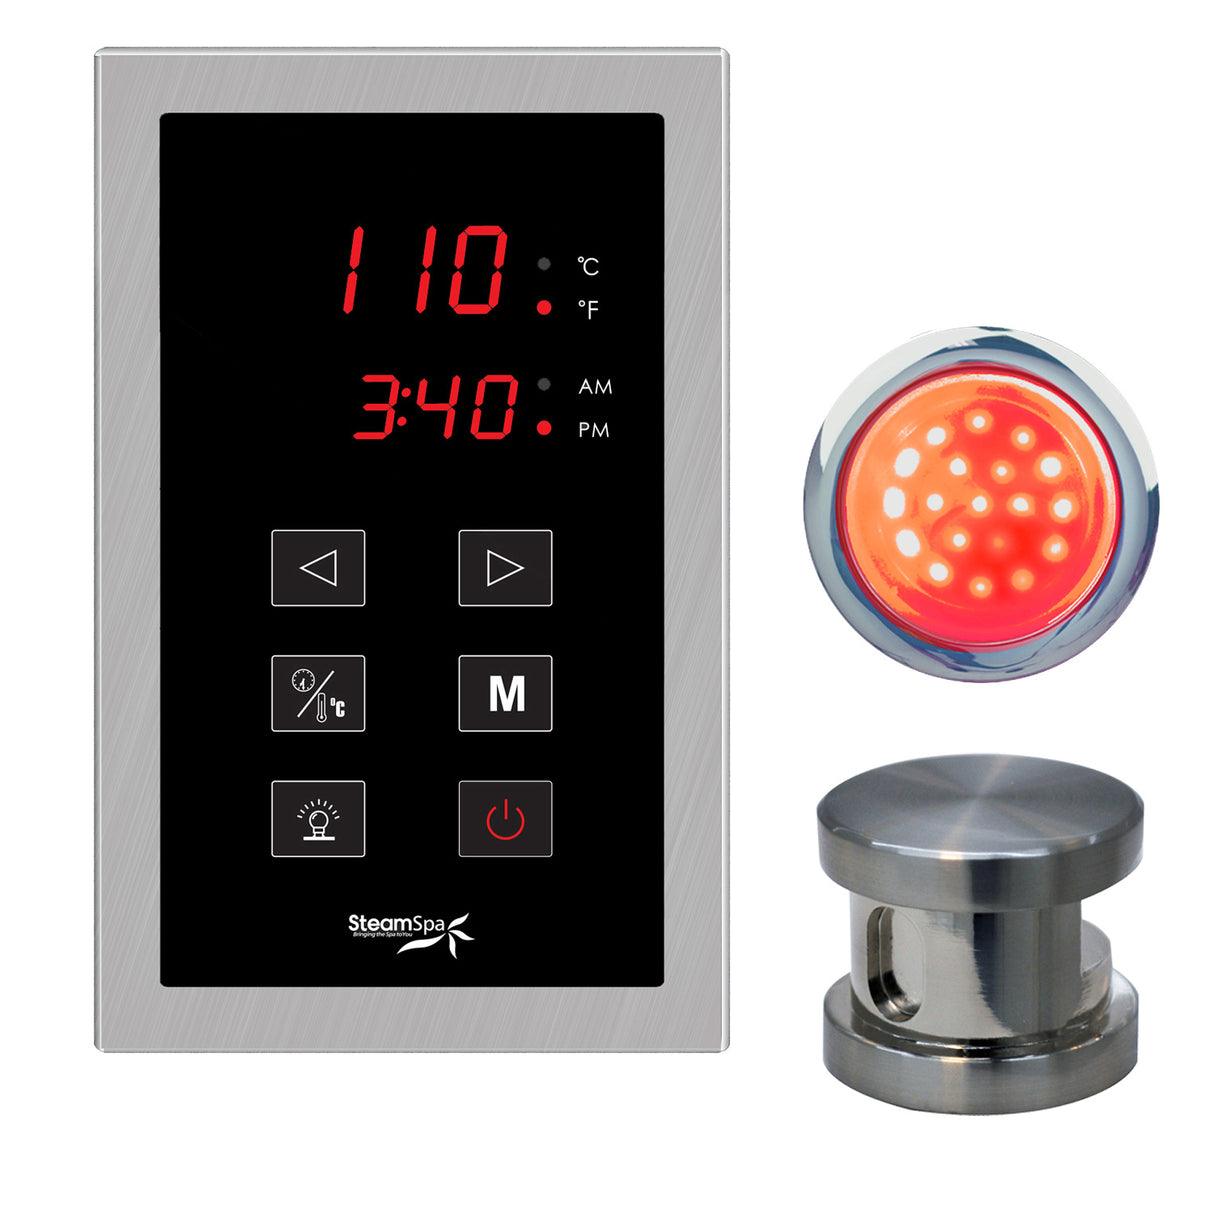 Indulgence Touch Panel Control Kit in Brushed Nickel INTPKBN